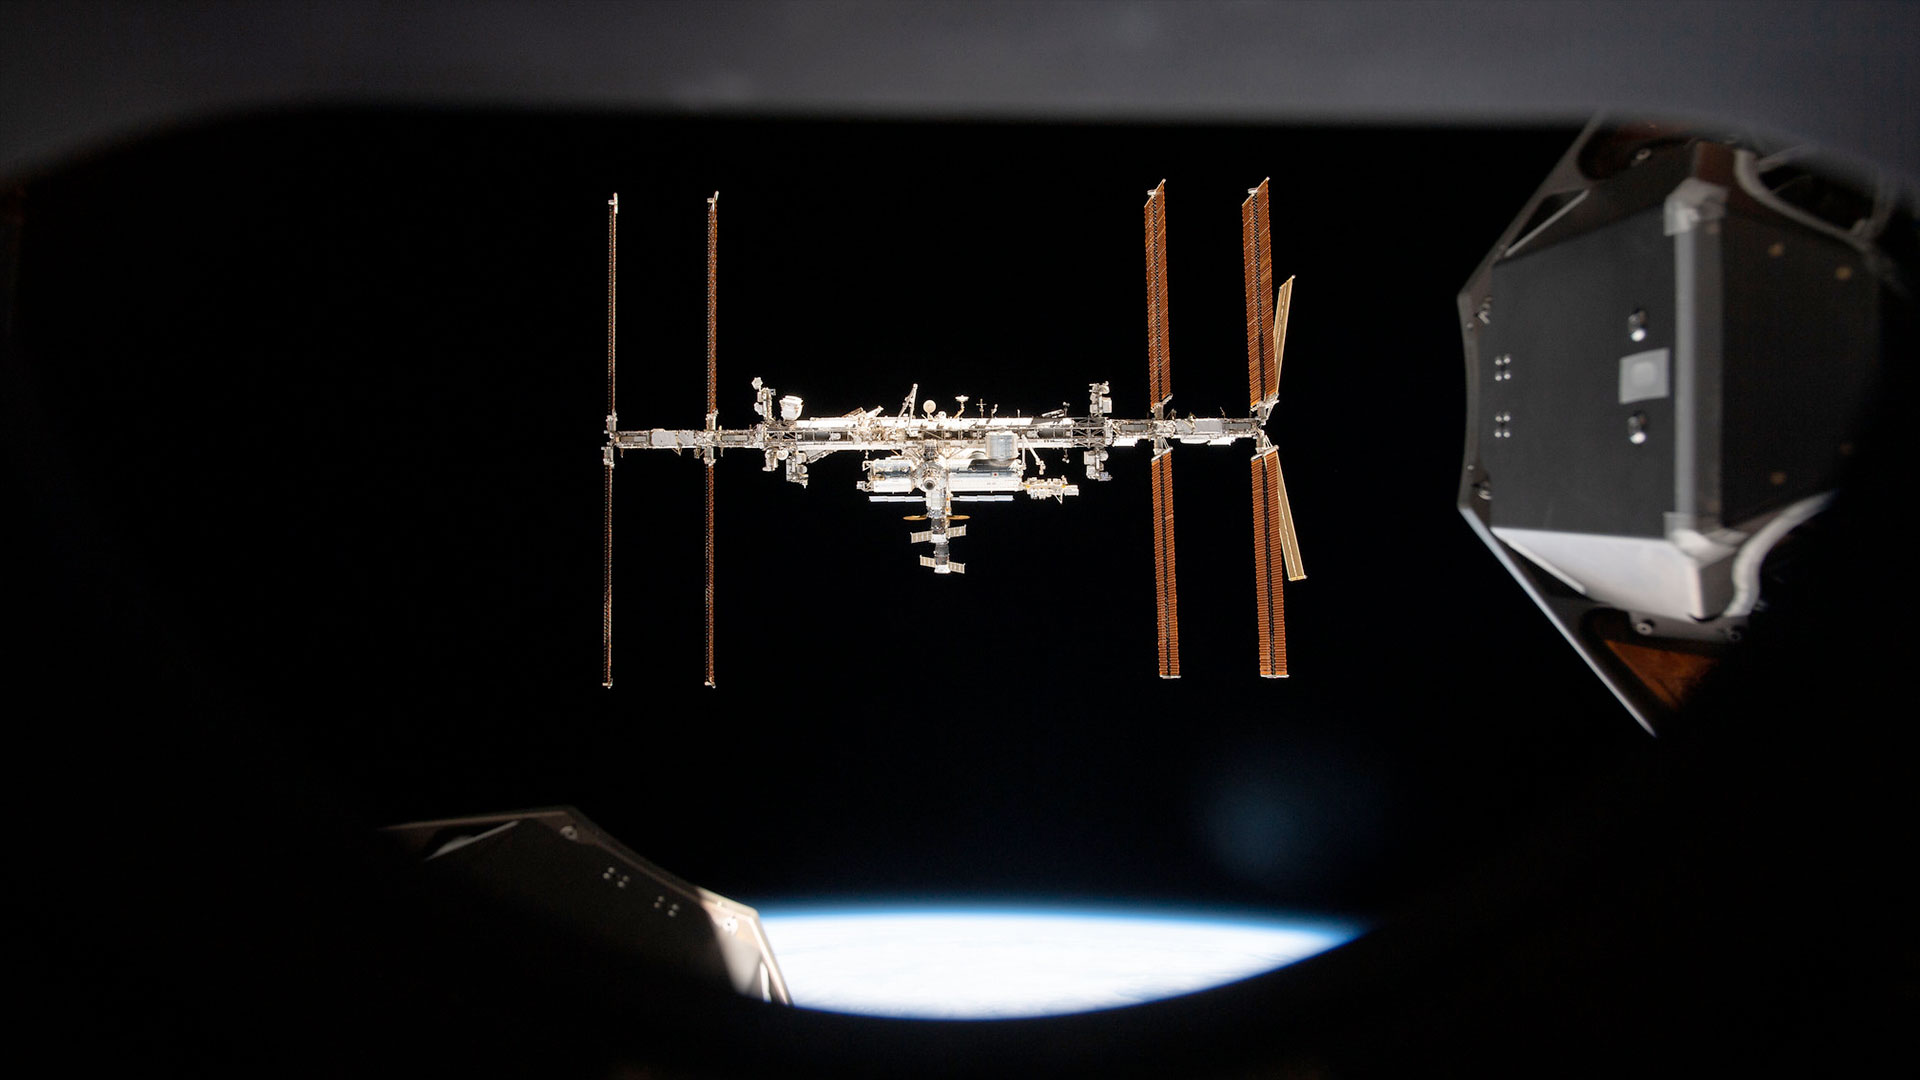  NASA looking at what artifacts to preserve from space station before 2030 demise 